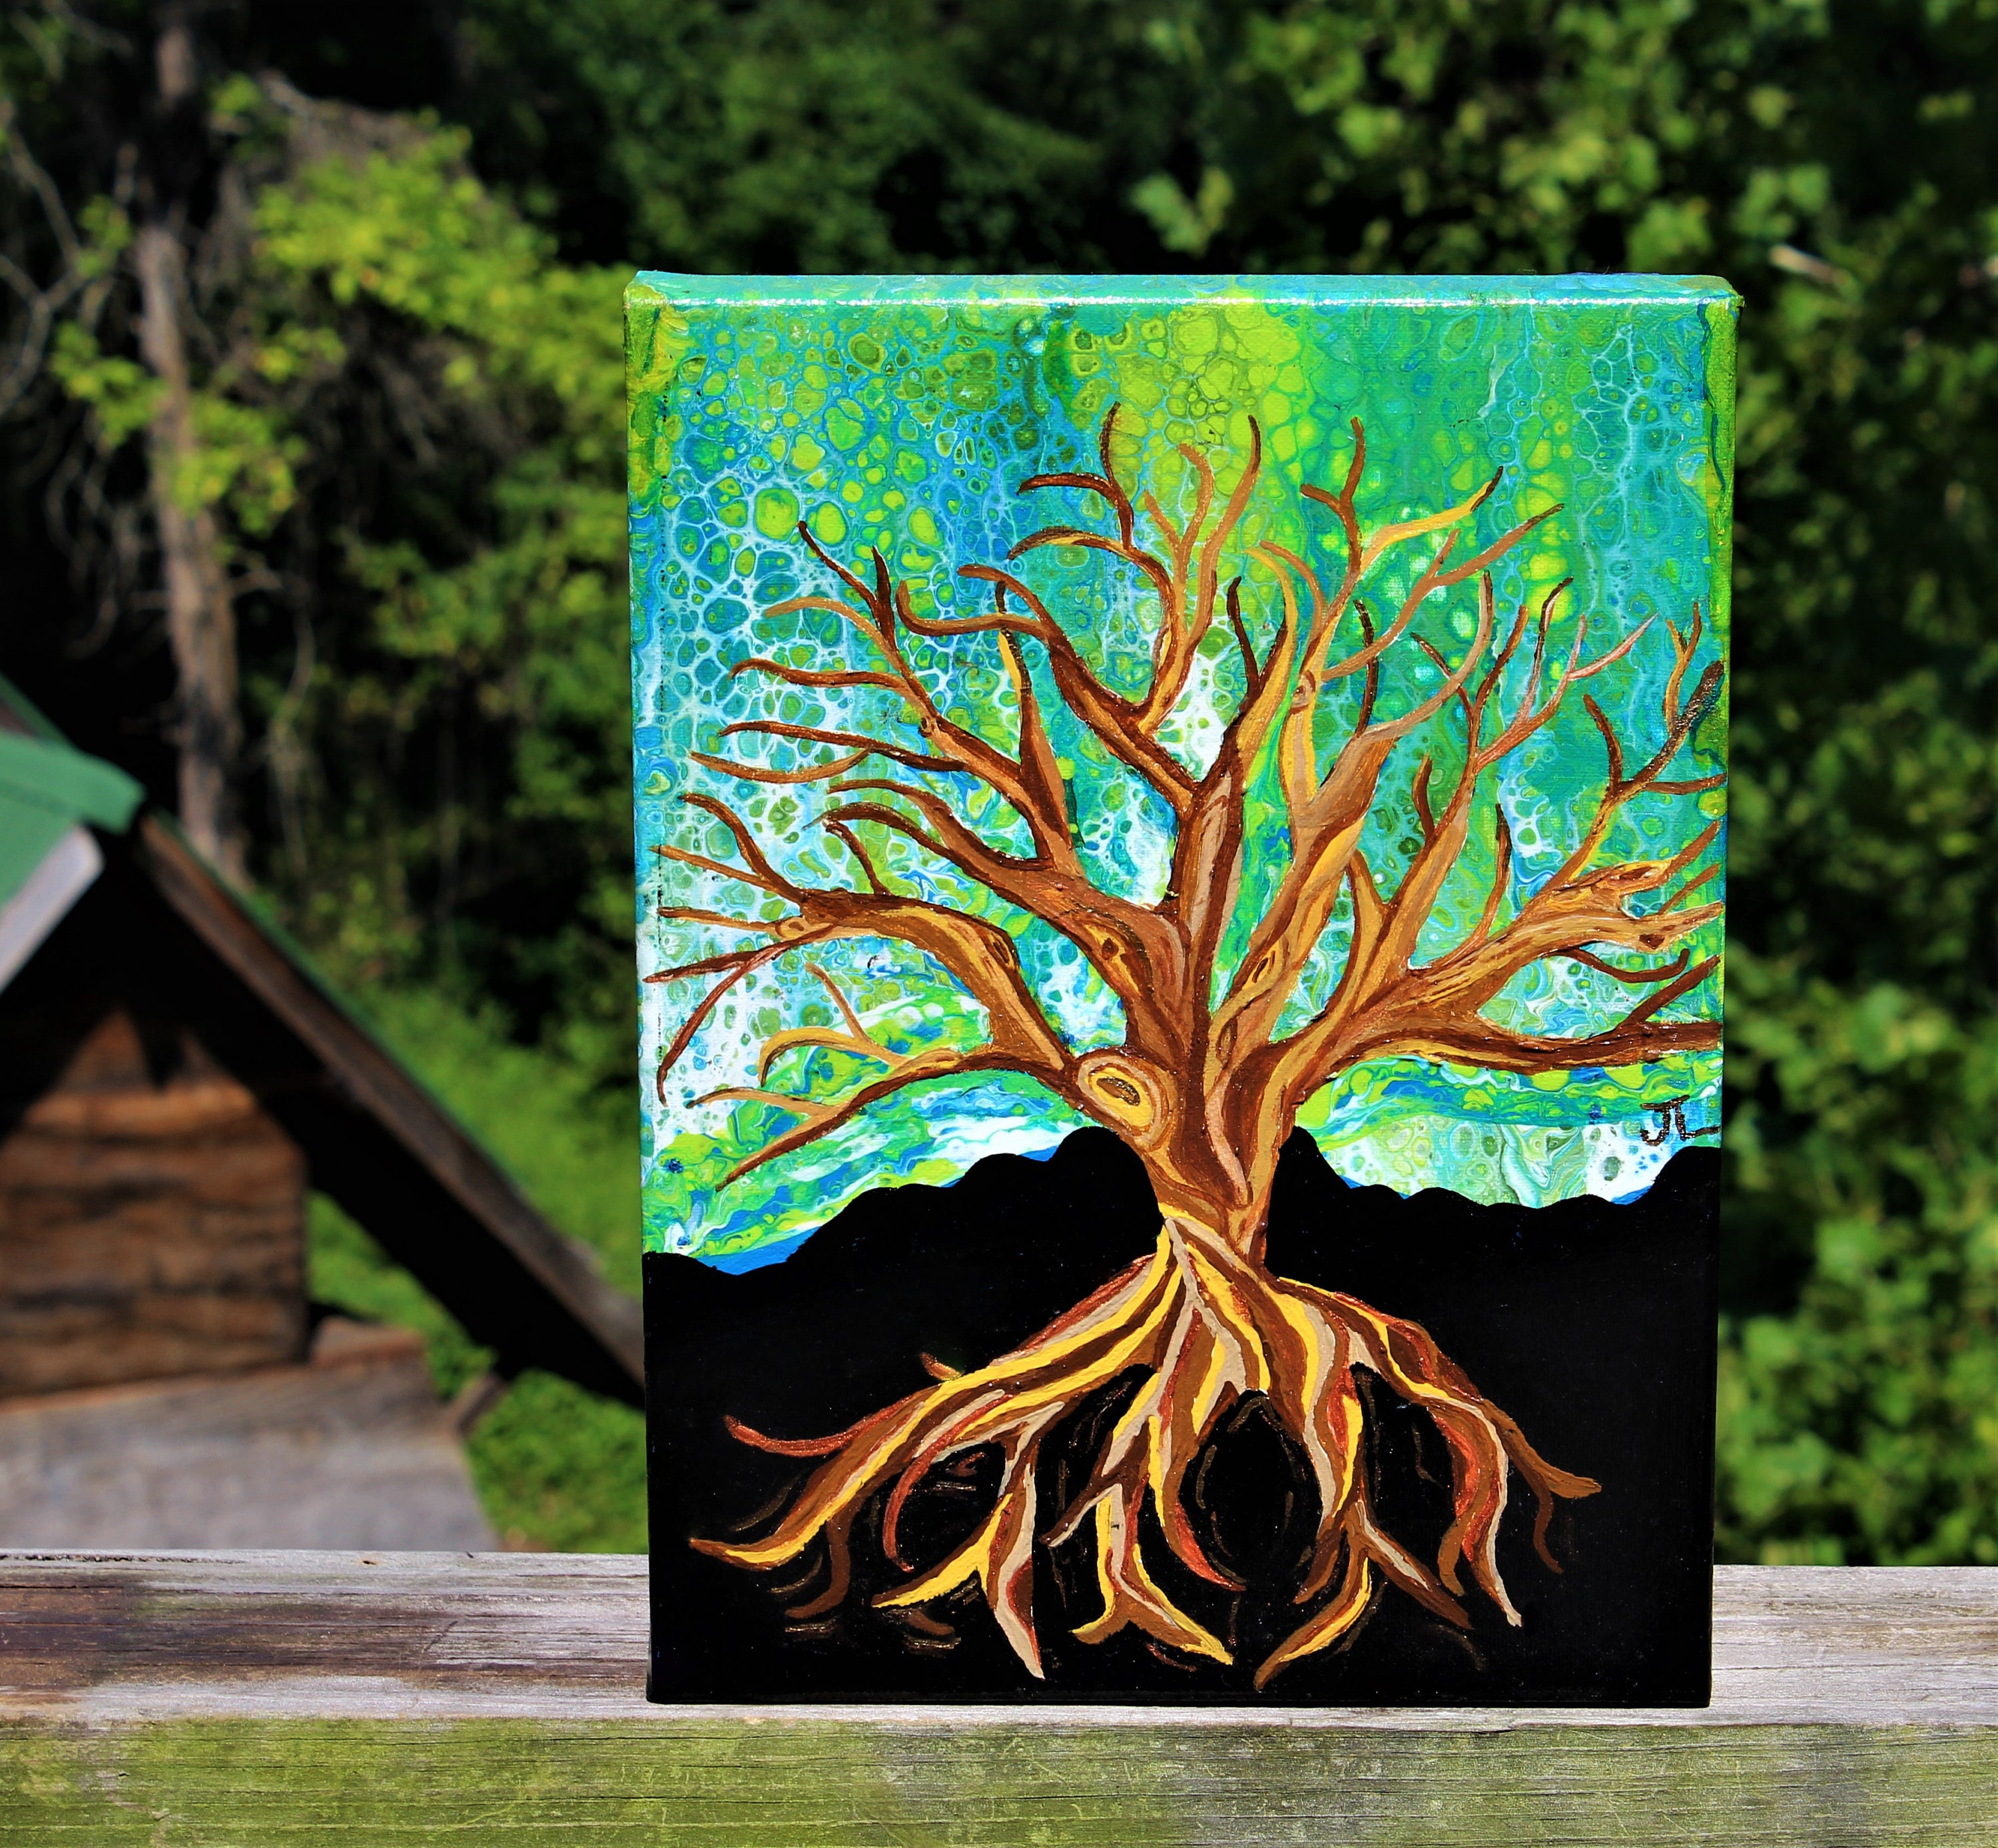 Tree of Life – Acrylic Paint Pouring Kit – 16 x20″ Canvas